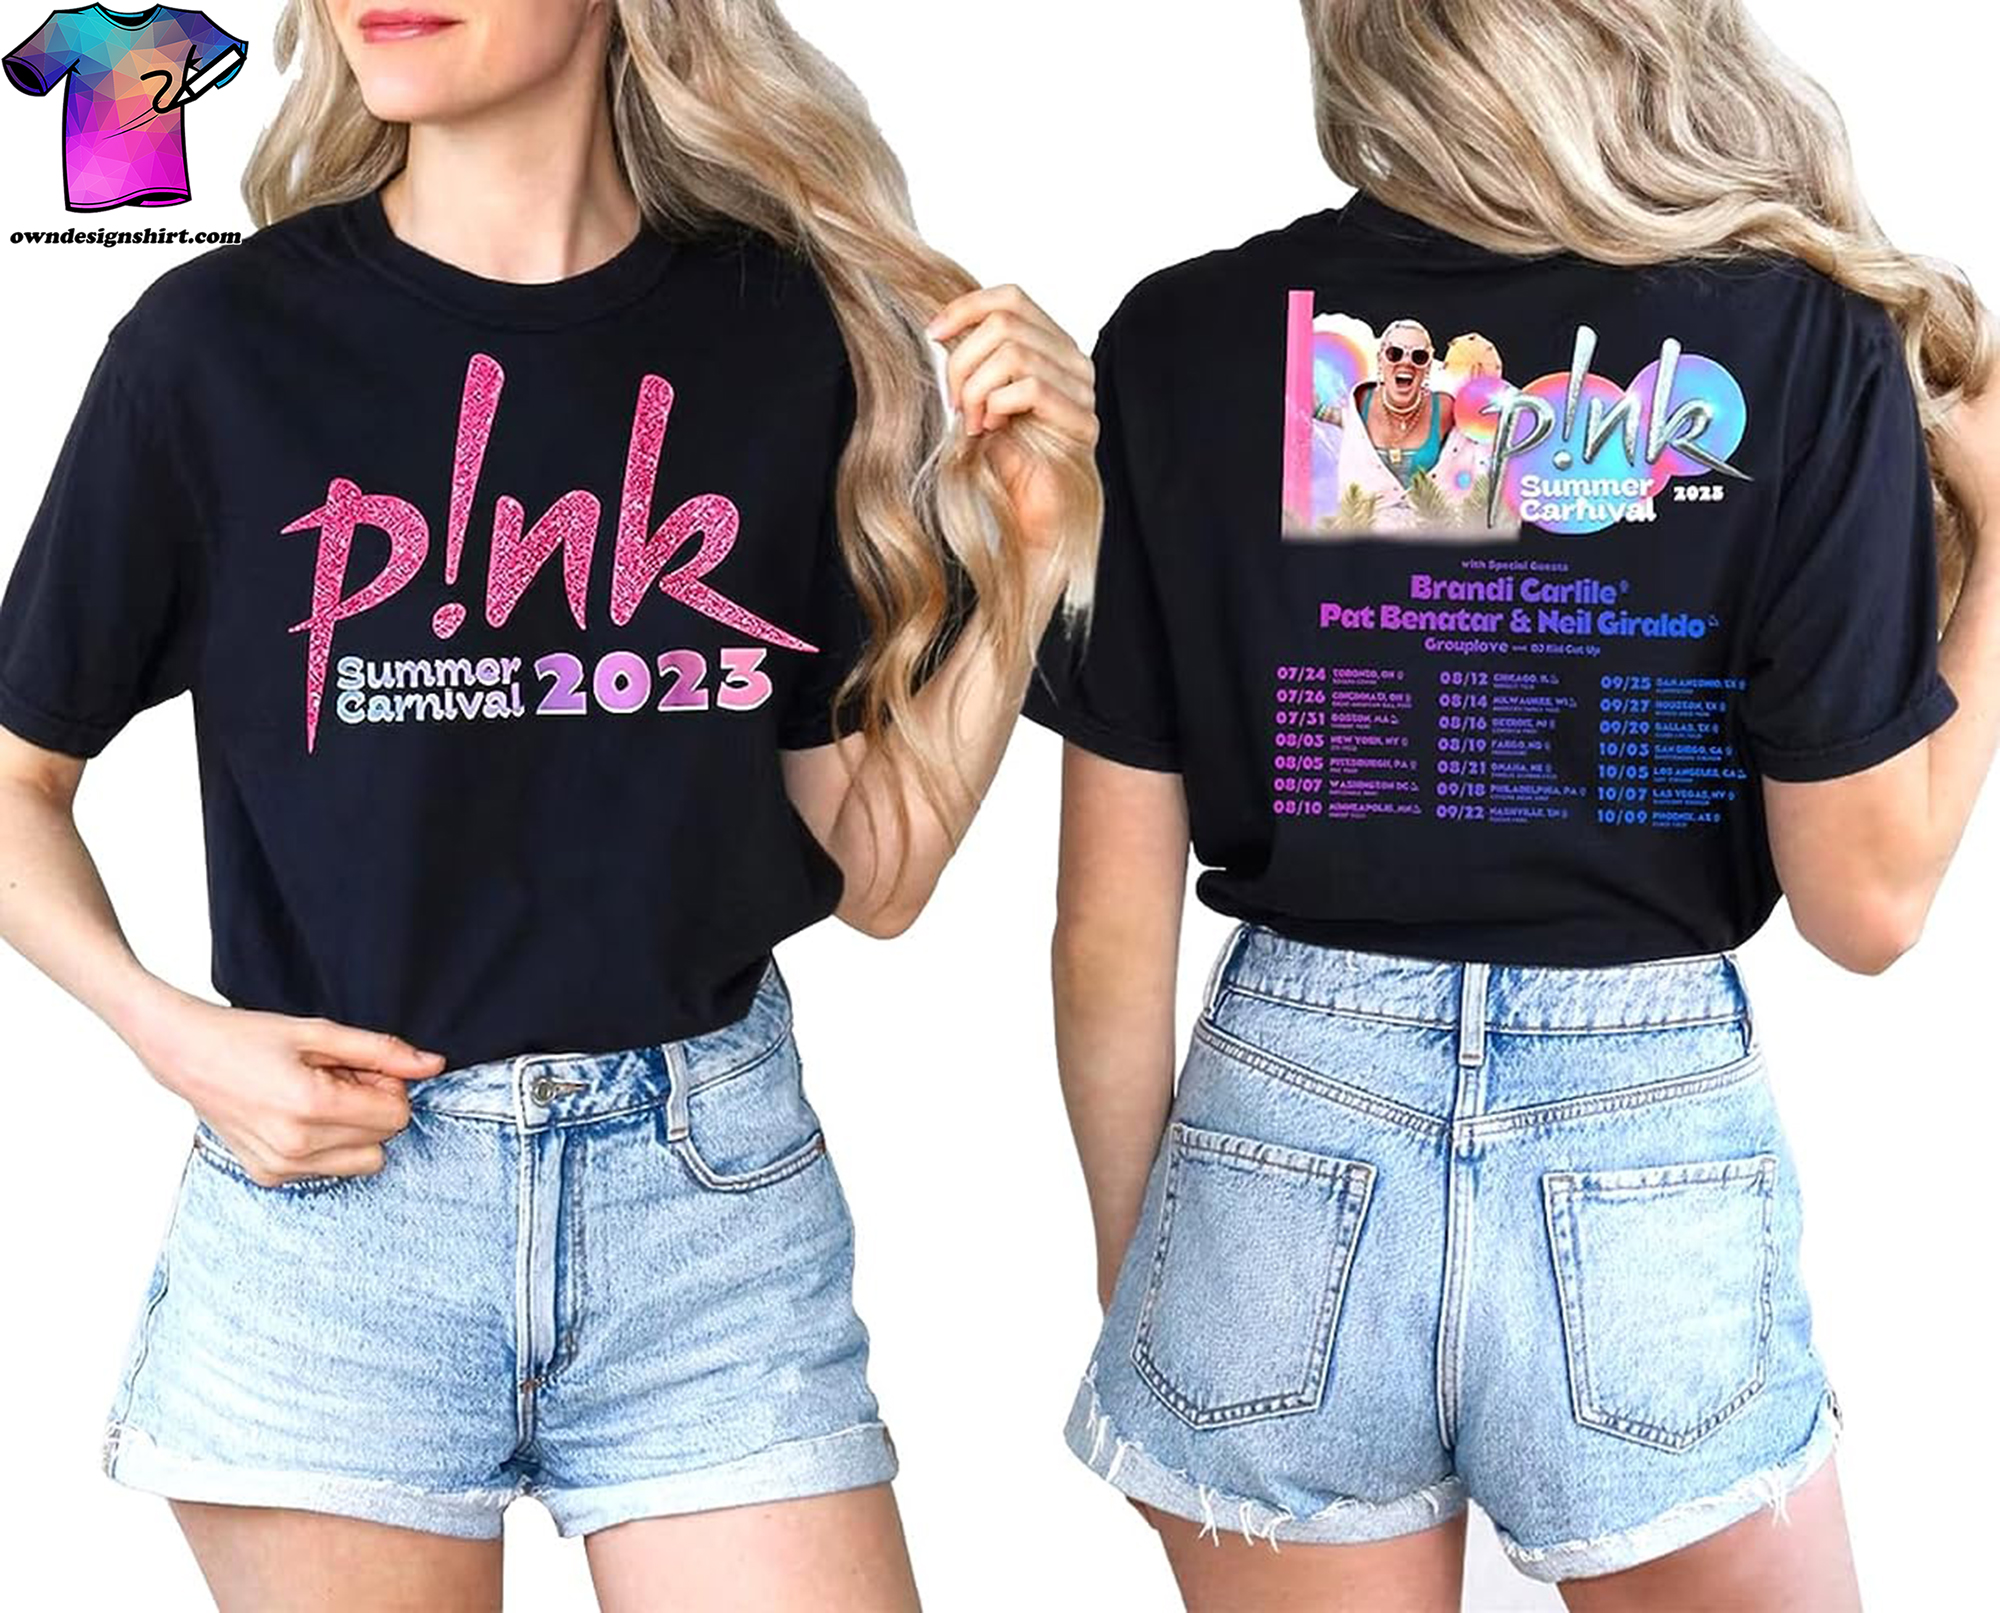 Vibrant Vibes and Stylish Swag The Pink Summer Carnival Tour 2023 and Its Exclusive Shirt Designs